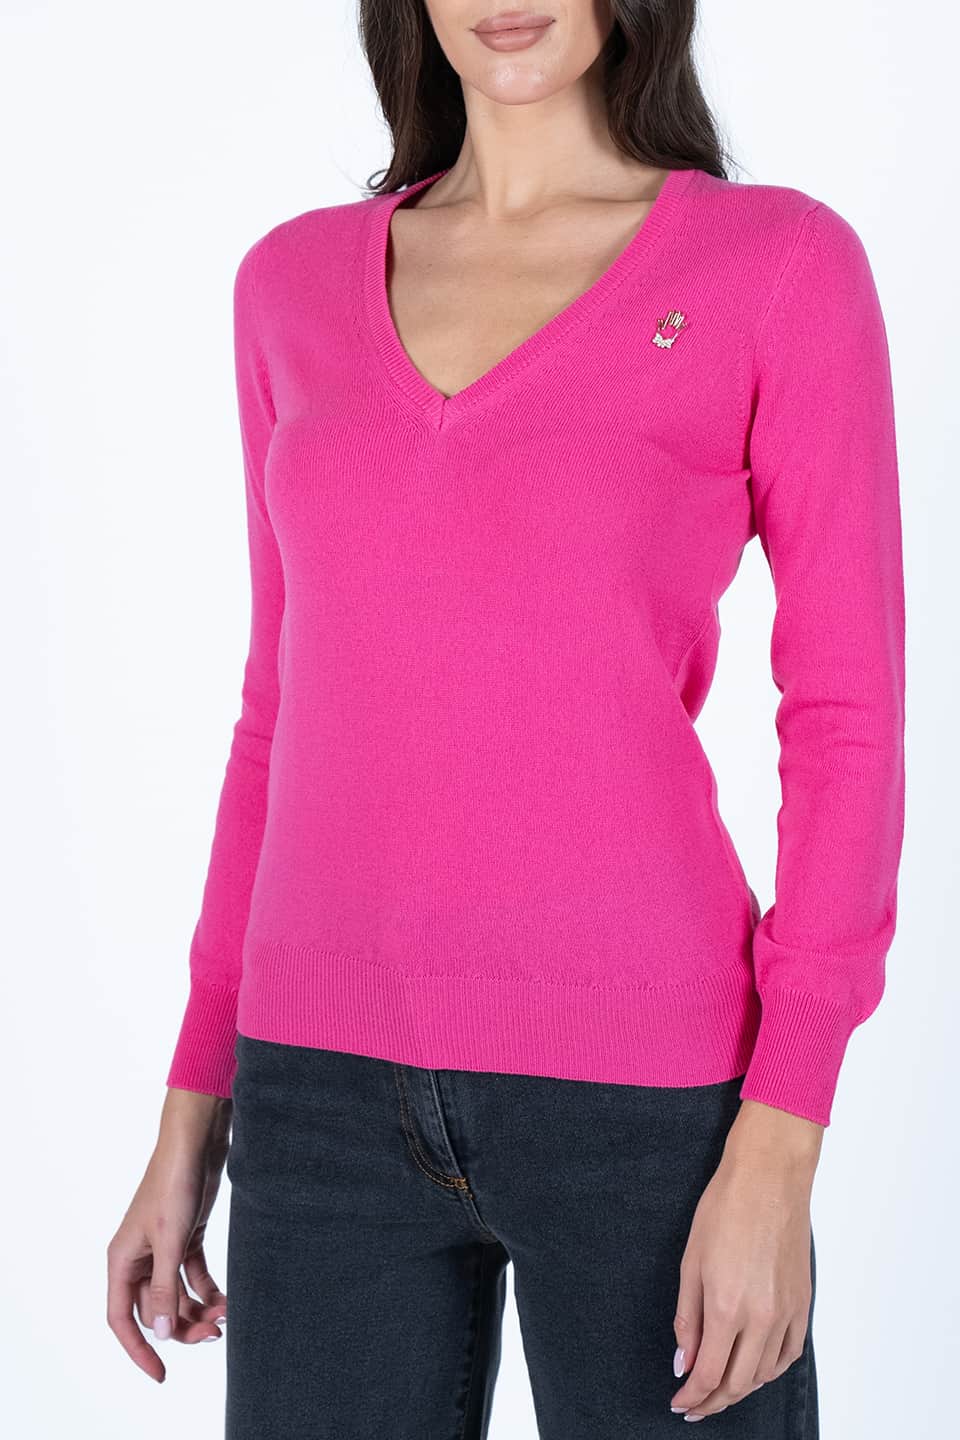 Thumbnail for Product gallery 1, Cashmere Pink Sweater